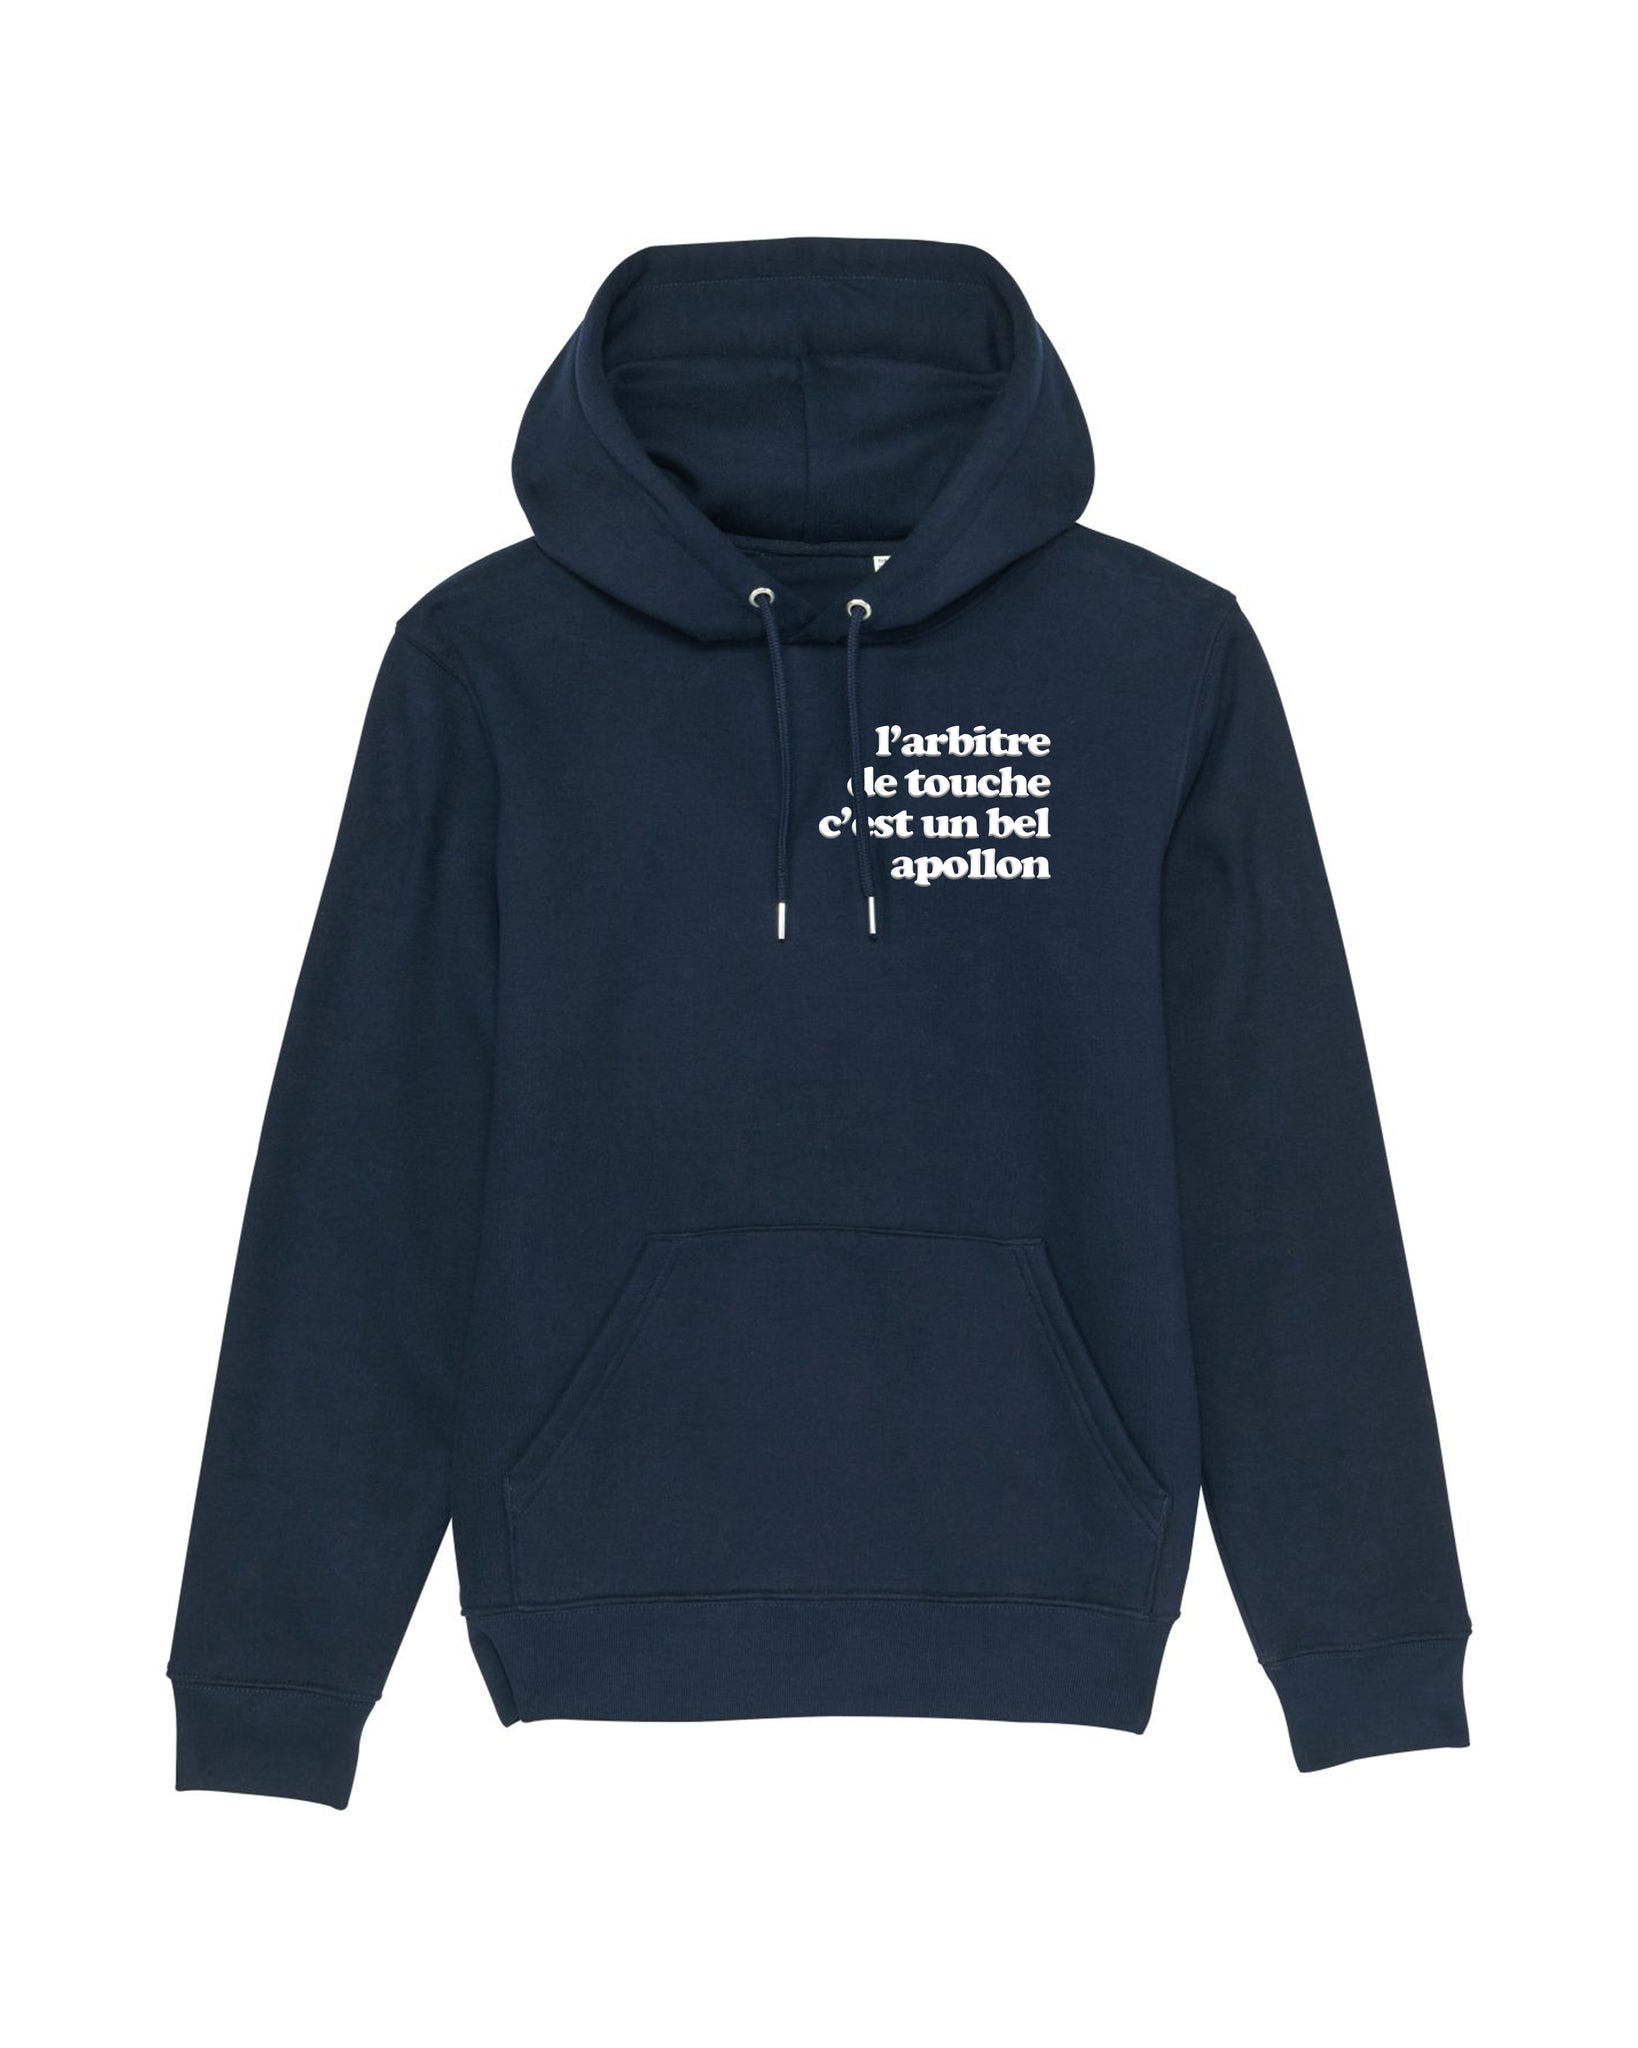 Sweat capuche bel apollon rugby